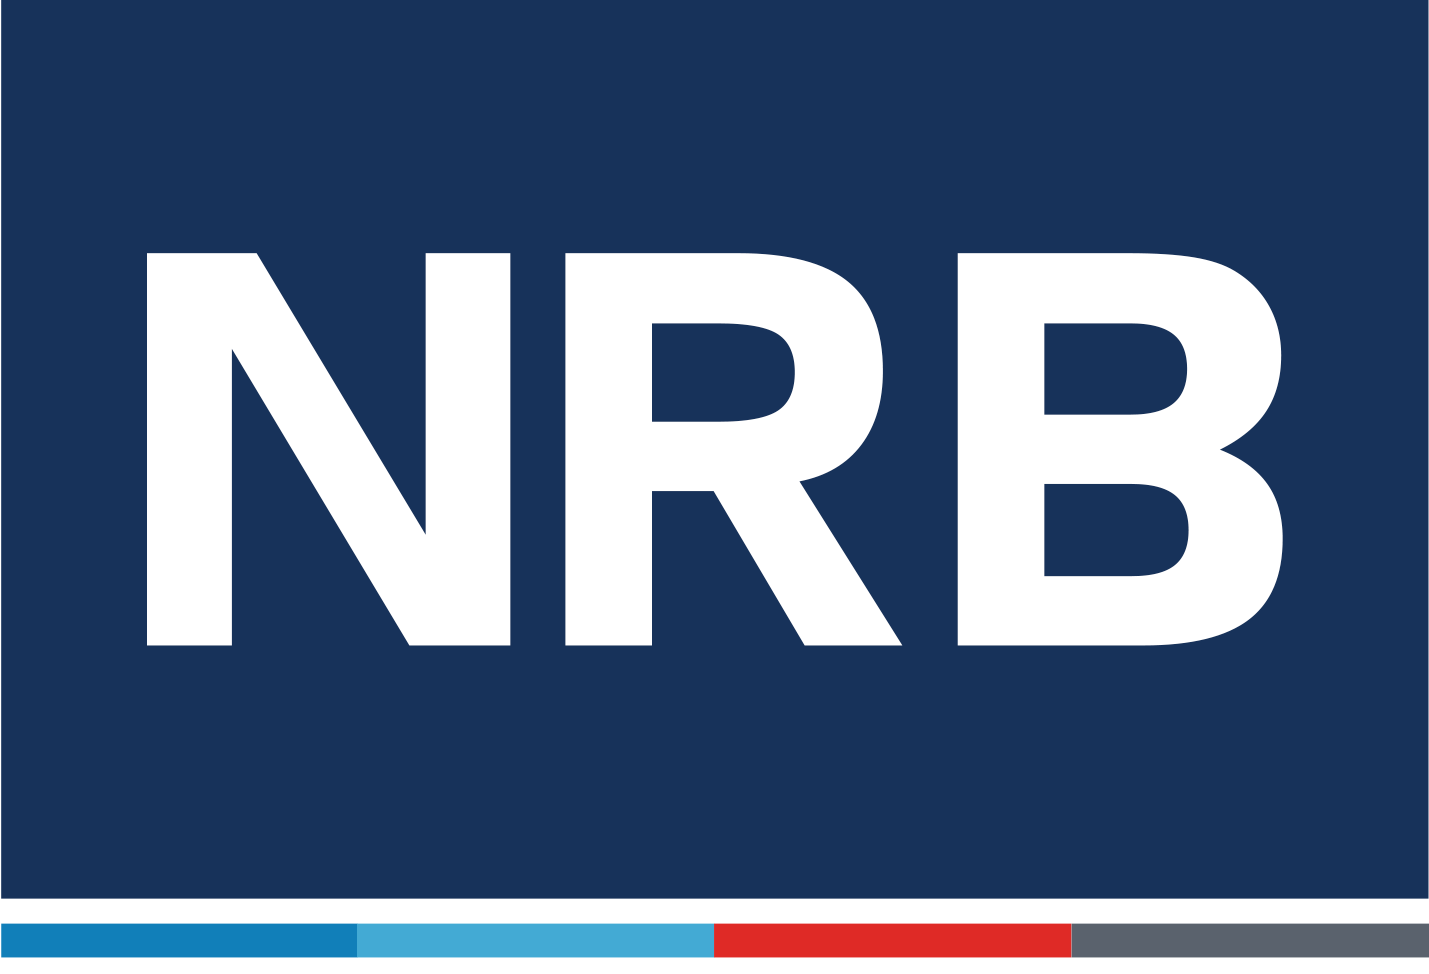 Logo NETWORK RESEARCH BELGIUM s.a. (NRB)